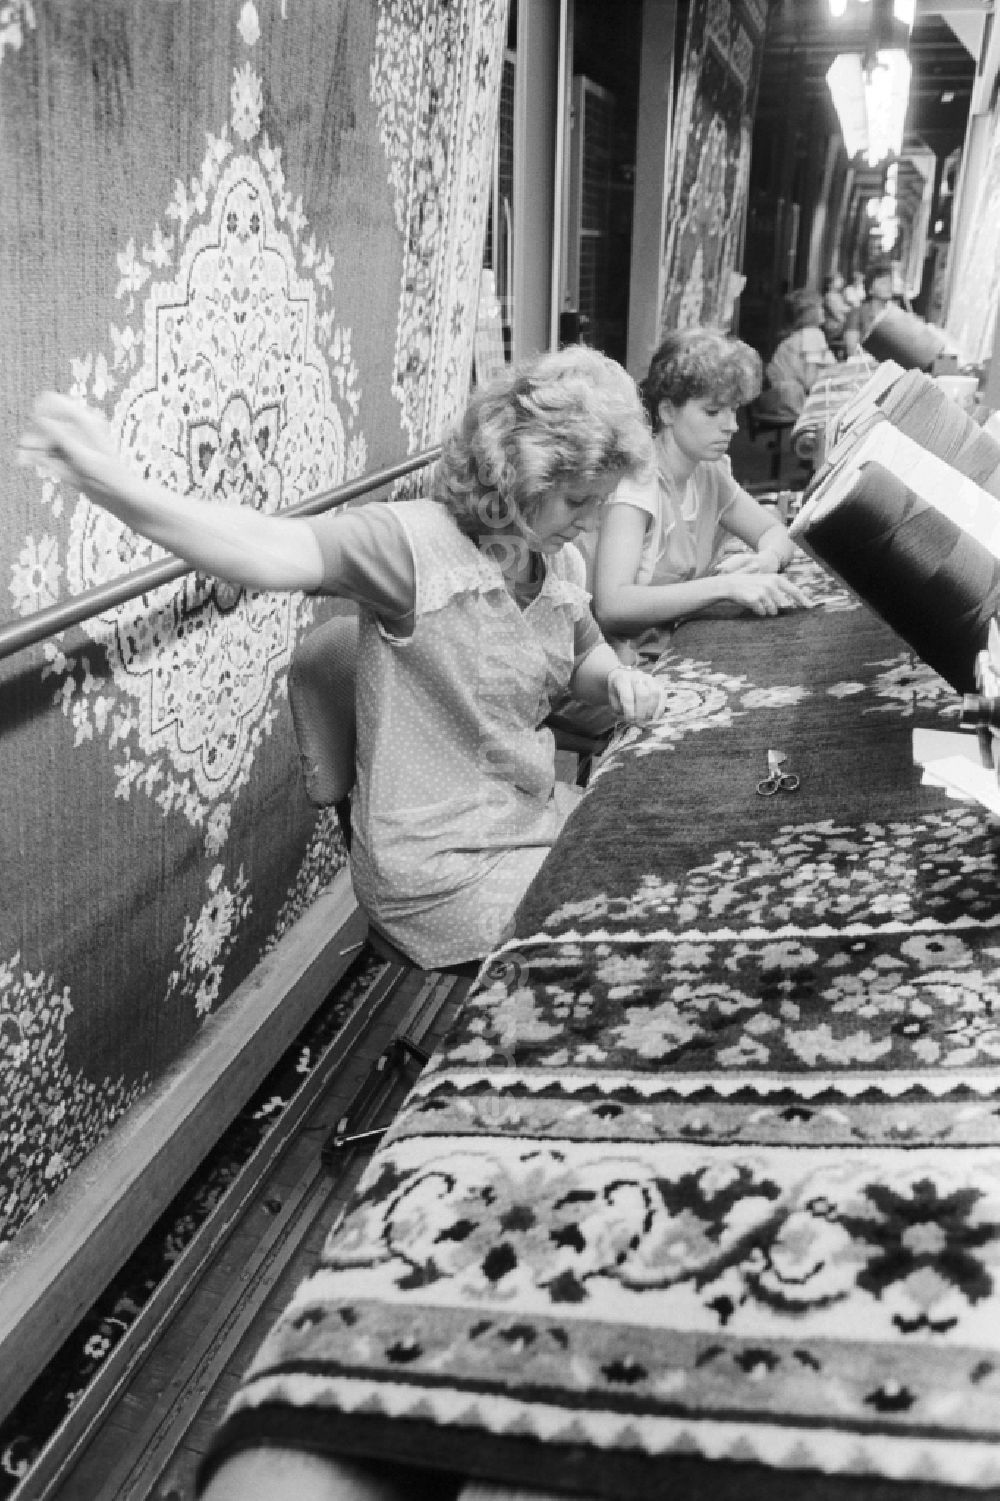 GDR picture archive: Malchow - View of the production halls of the VEB Carpet Factory North Malchow in Malchow in Mecklenburg-Western Pomerania in the field of the former GDR, German Democratic Republic